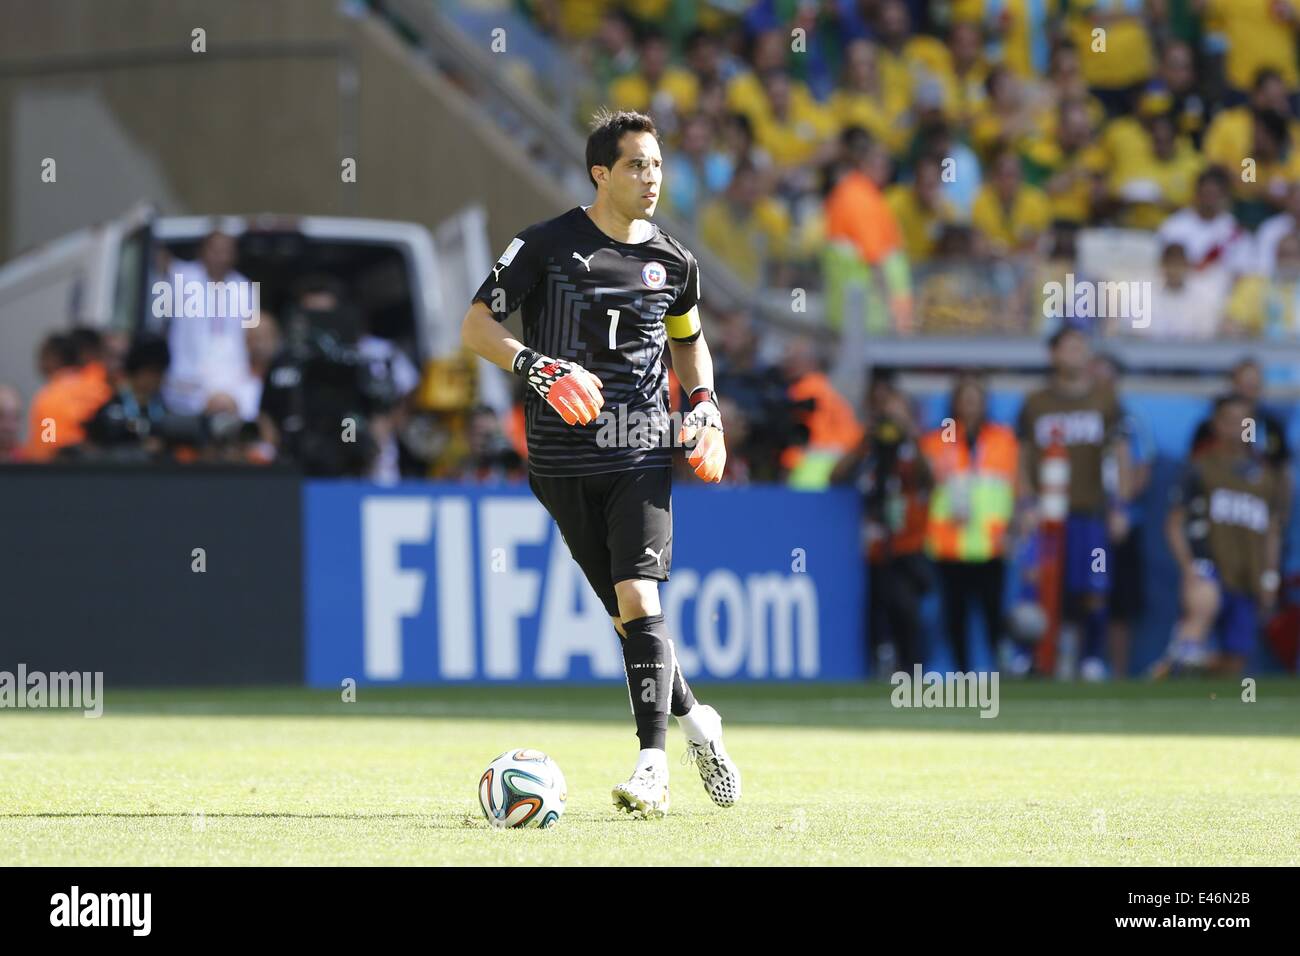 Belo Horizonte, Brazil. 28th June, 2014. Claudio Bravo (CHI) Football/Soccer : FIFA World Cup Brazil 2014 round of 16 match between Brazil and Chile at the Mineirao Stadium in Belo Horizonte, Brazil . © AFLO/Alamy Live News Stock Photo